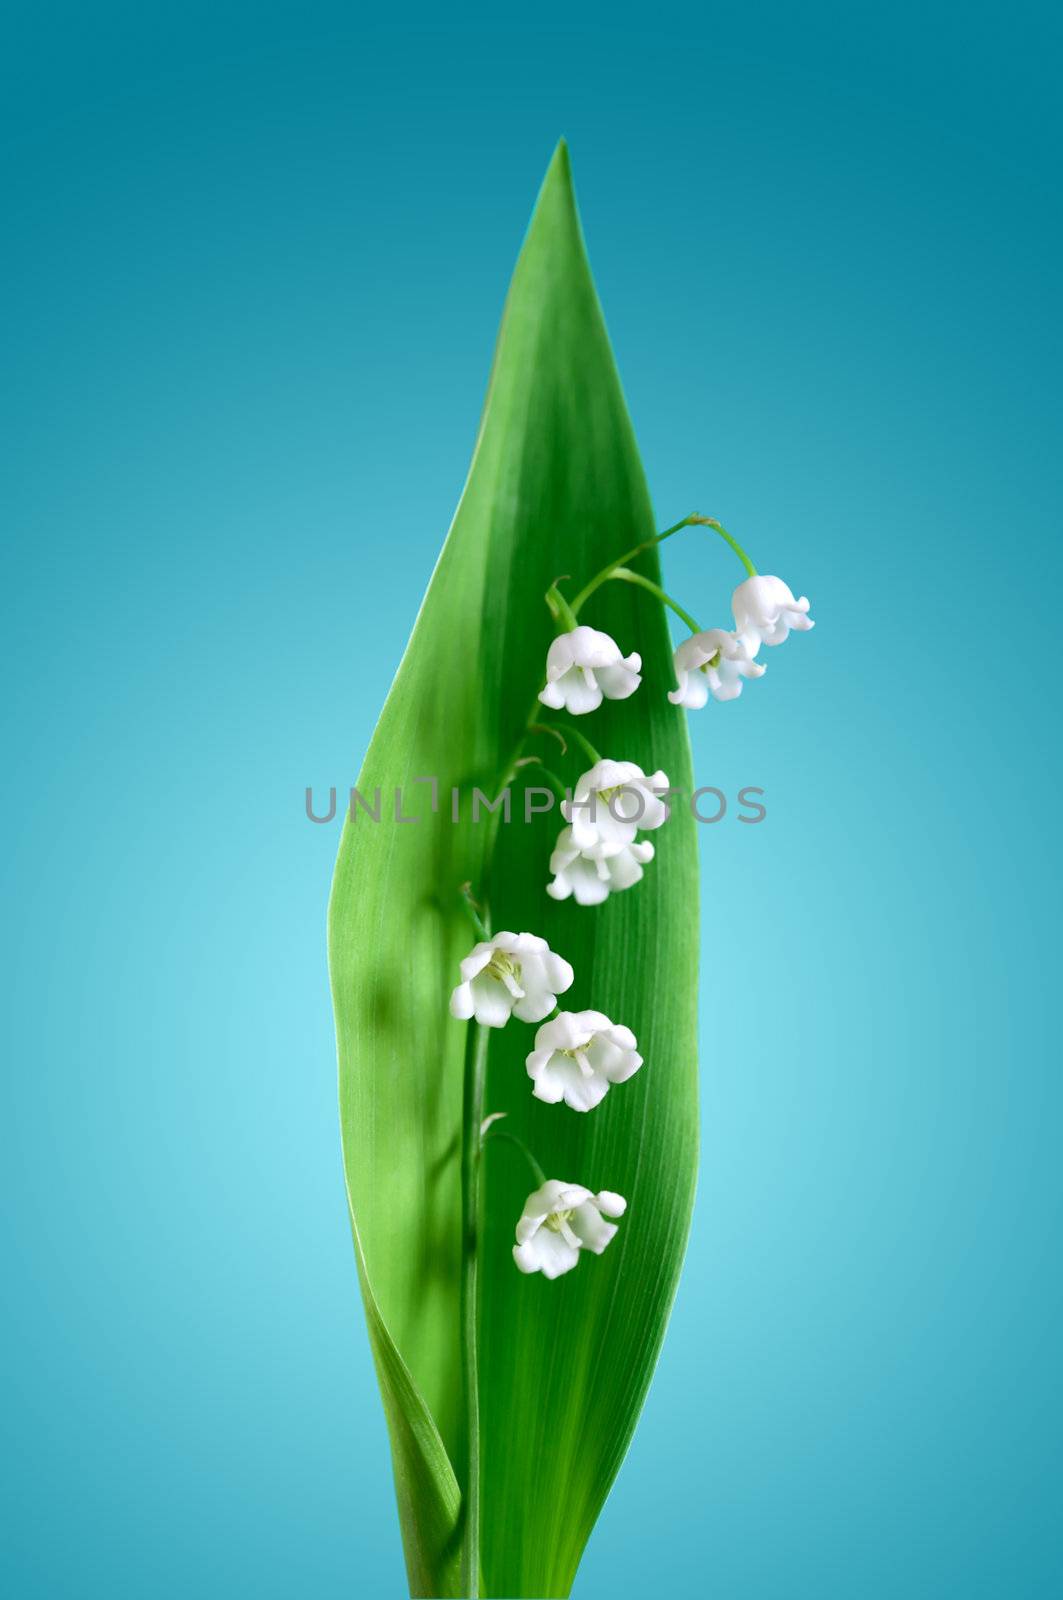 Lily of the valley with long green leaf on blue gradient background